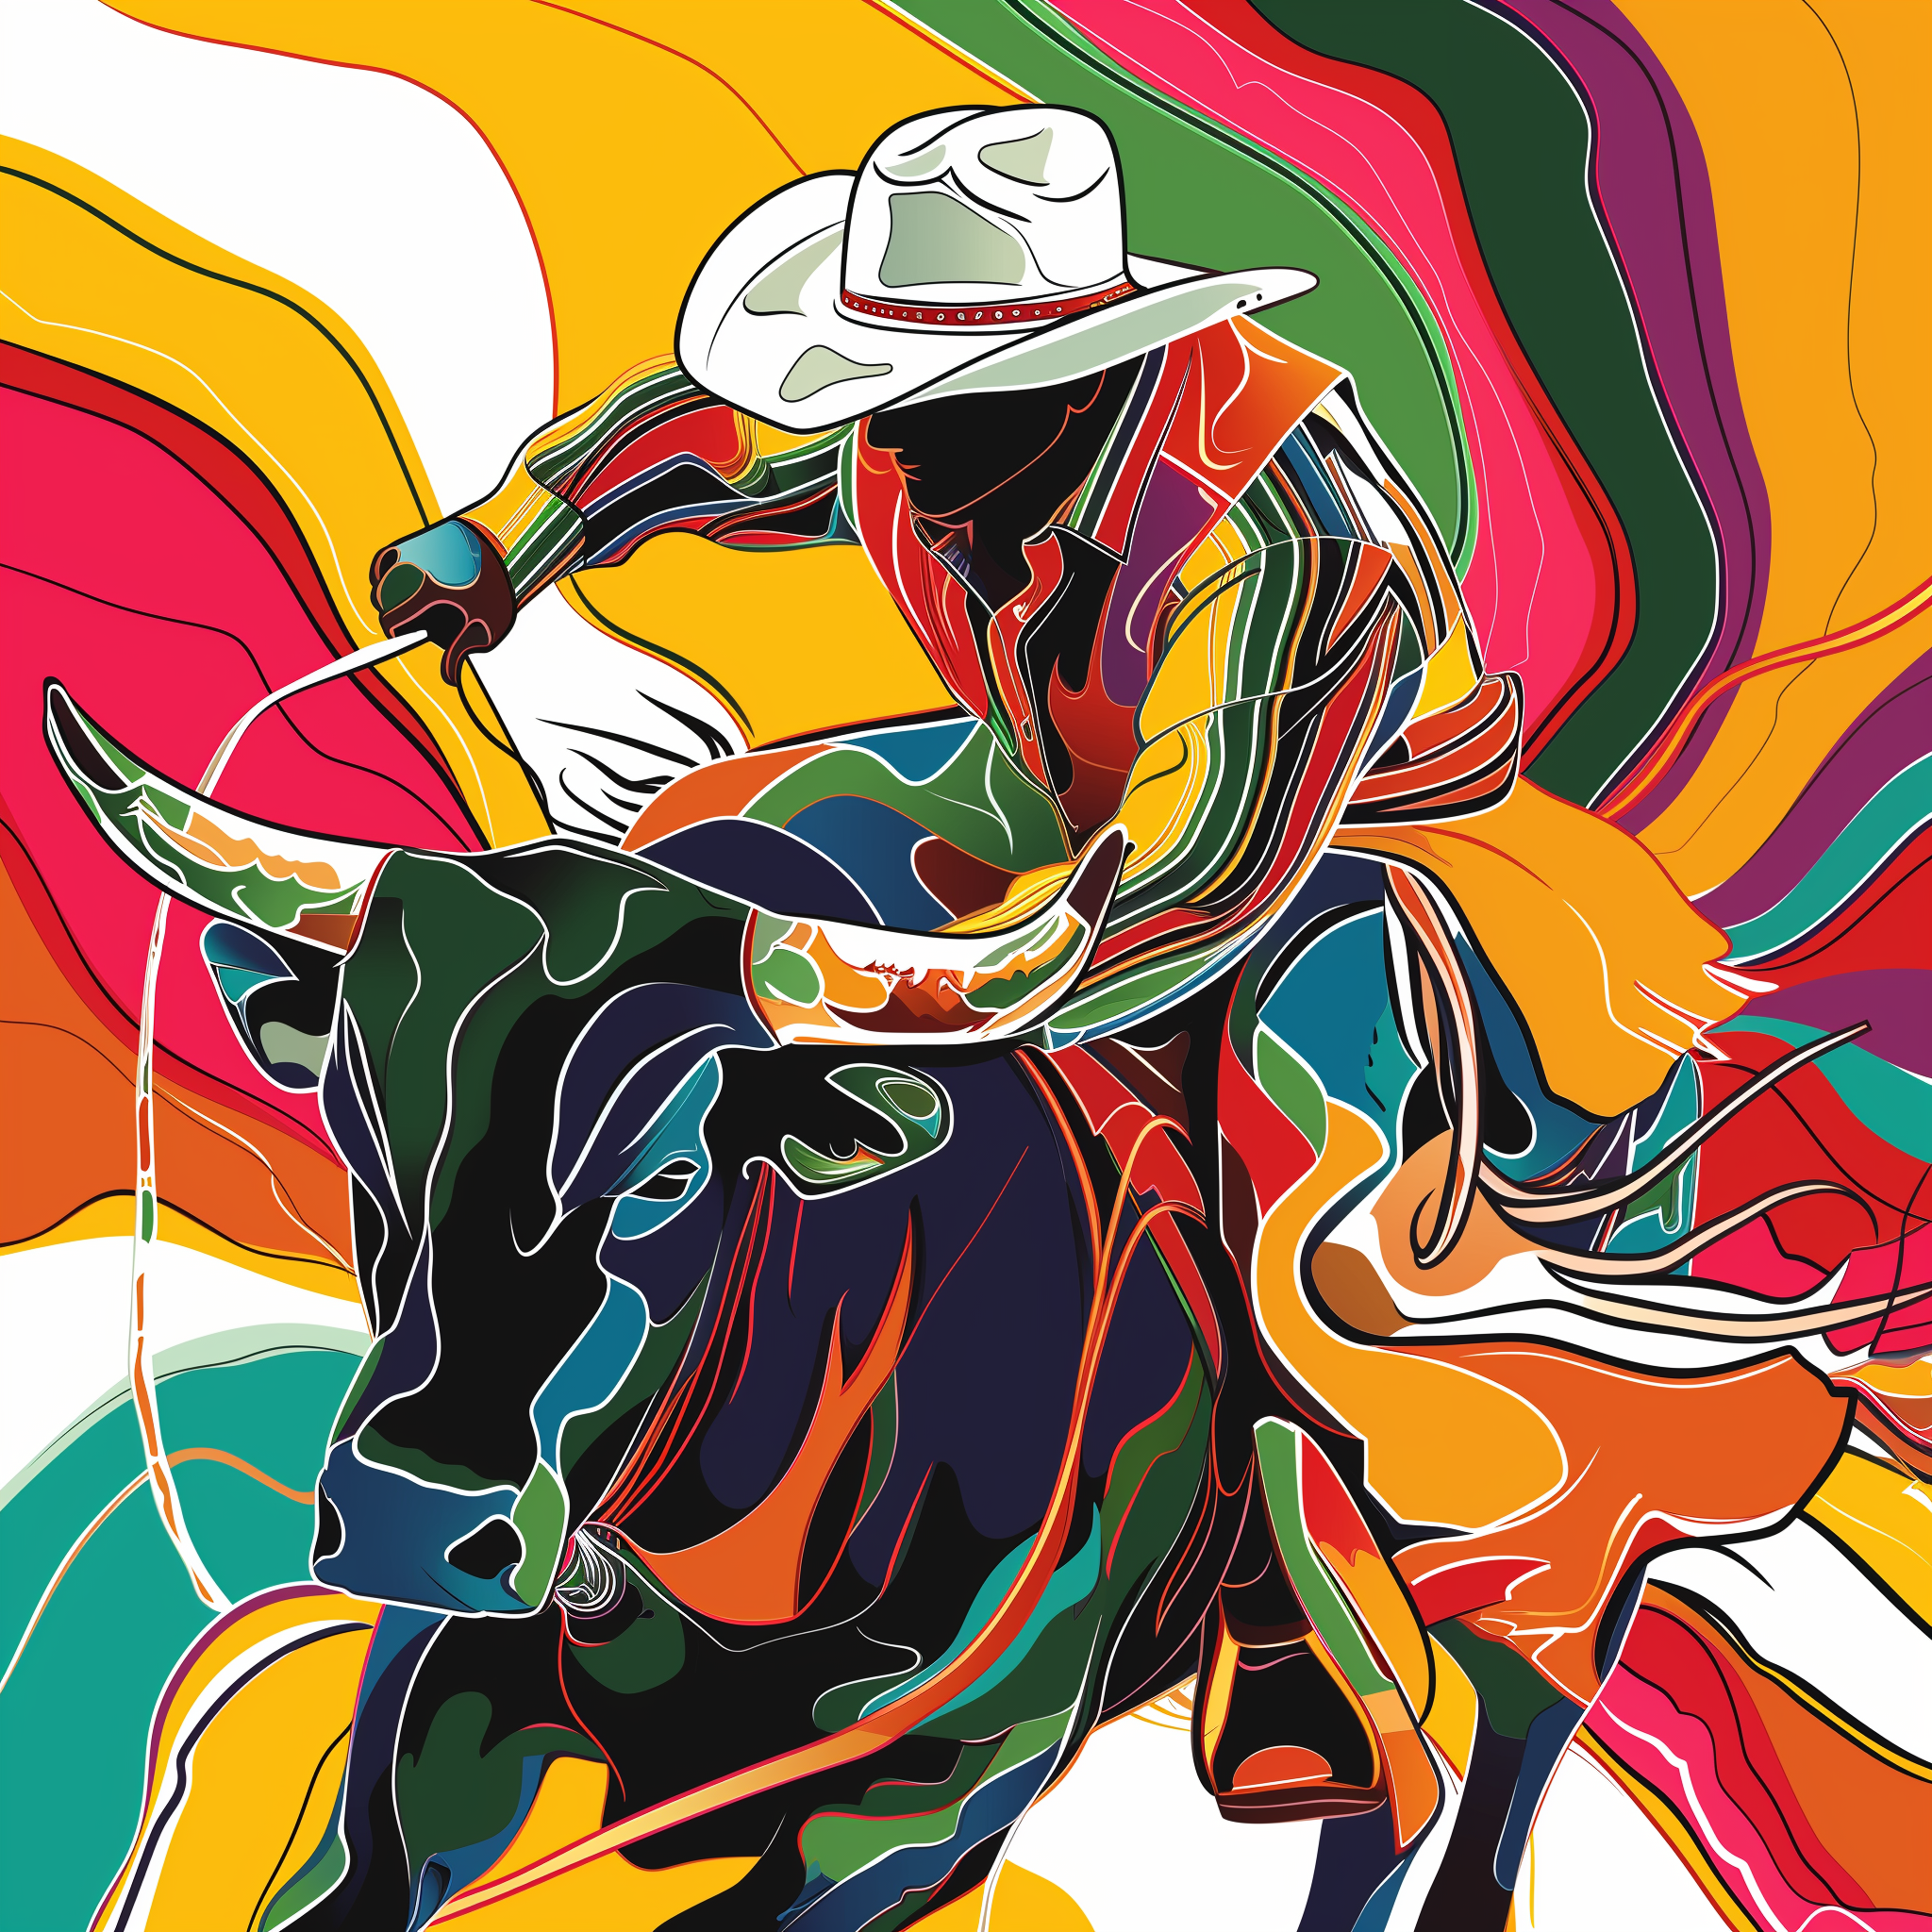 Vibrant avatar of a cowboy riding a bull at a rodeo with colorful abstract background, suitable for profile picture use.